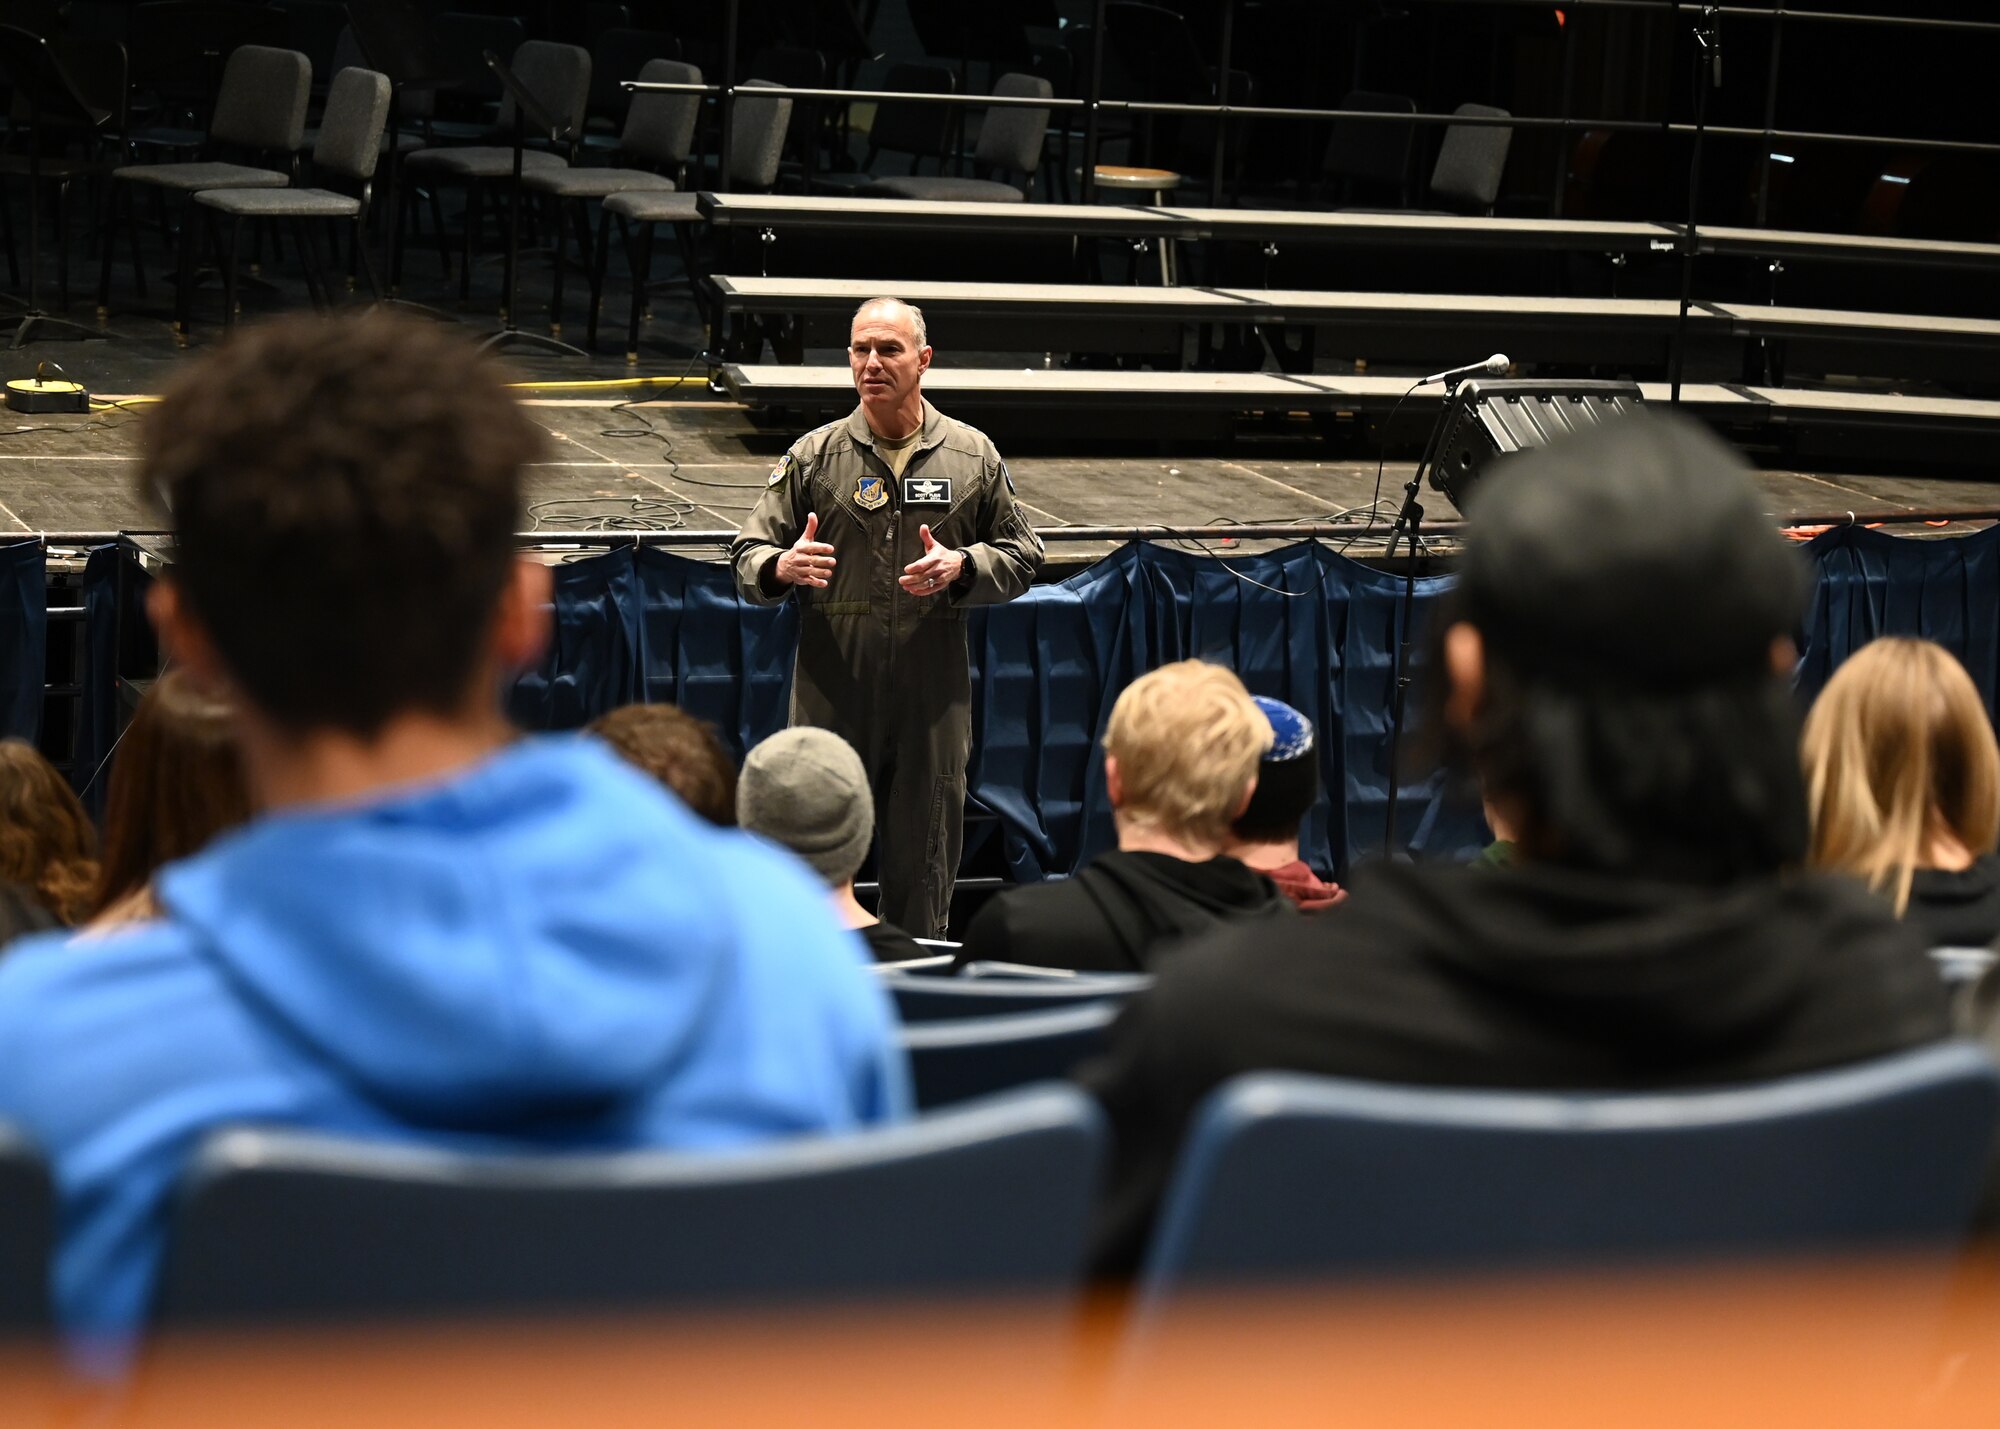 Lt. Gen. Scott L. Pleus, Seventh Air Force commander, briefs a group of students from Superior High School on March 7, 2022 in Superior, Wisc. Pleus is an alumni of Superior High School having graduated in the 80's and came back to talk to the students about his accomplishments and experiences since joining the Air Force. (U.S. Air Force photo by Tech. Sgt. Jessica Kind/Released)